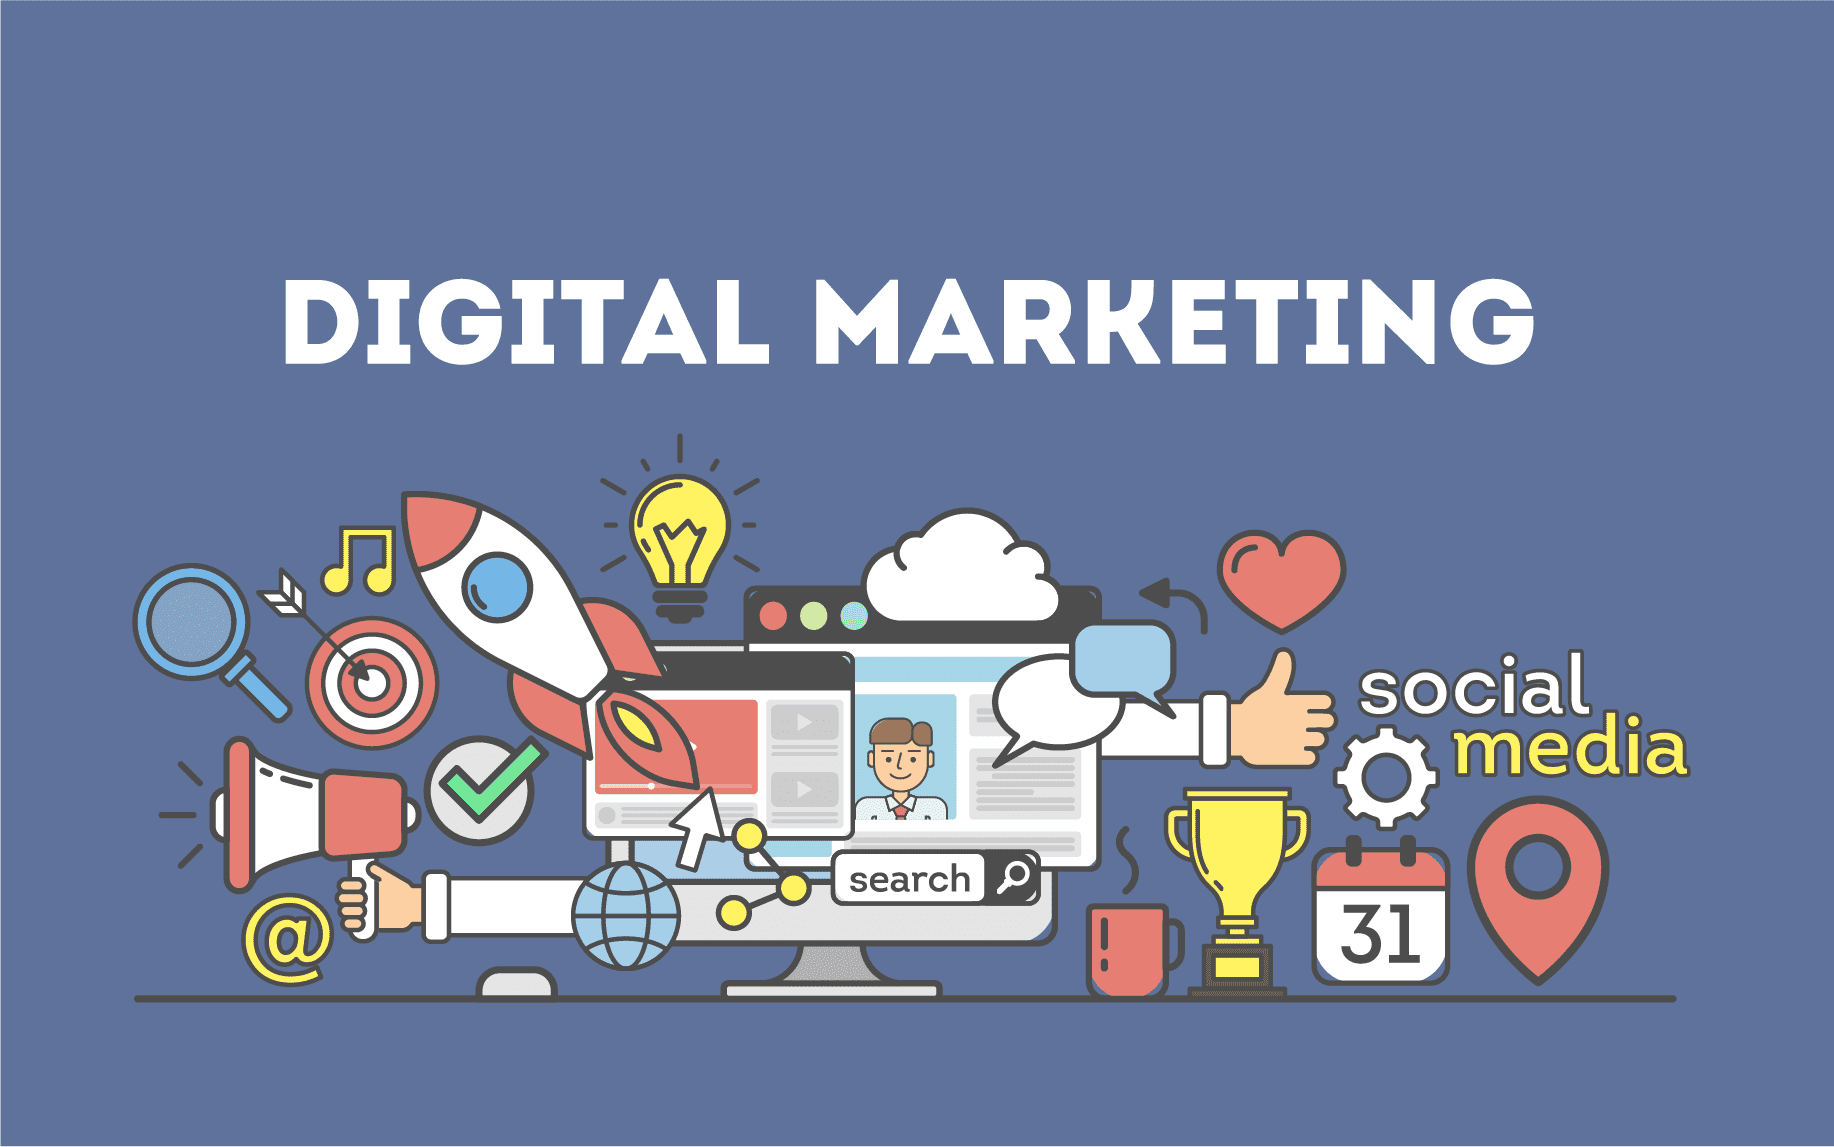 How to became a Digital Marketer
